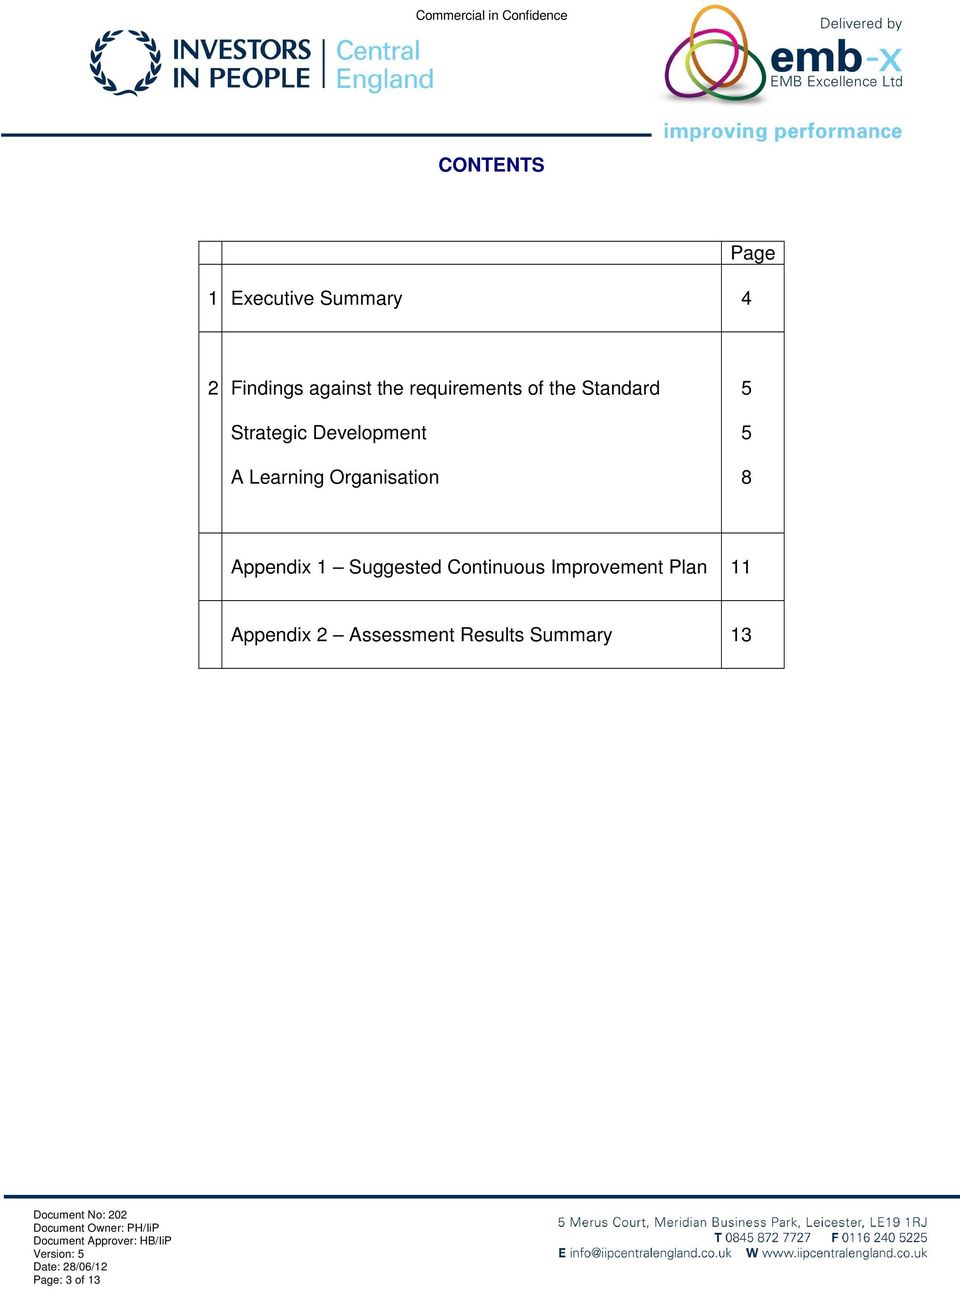 Organisation 5 5 8 Appendix 1 Suggested Continuous